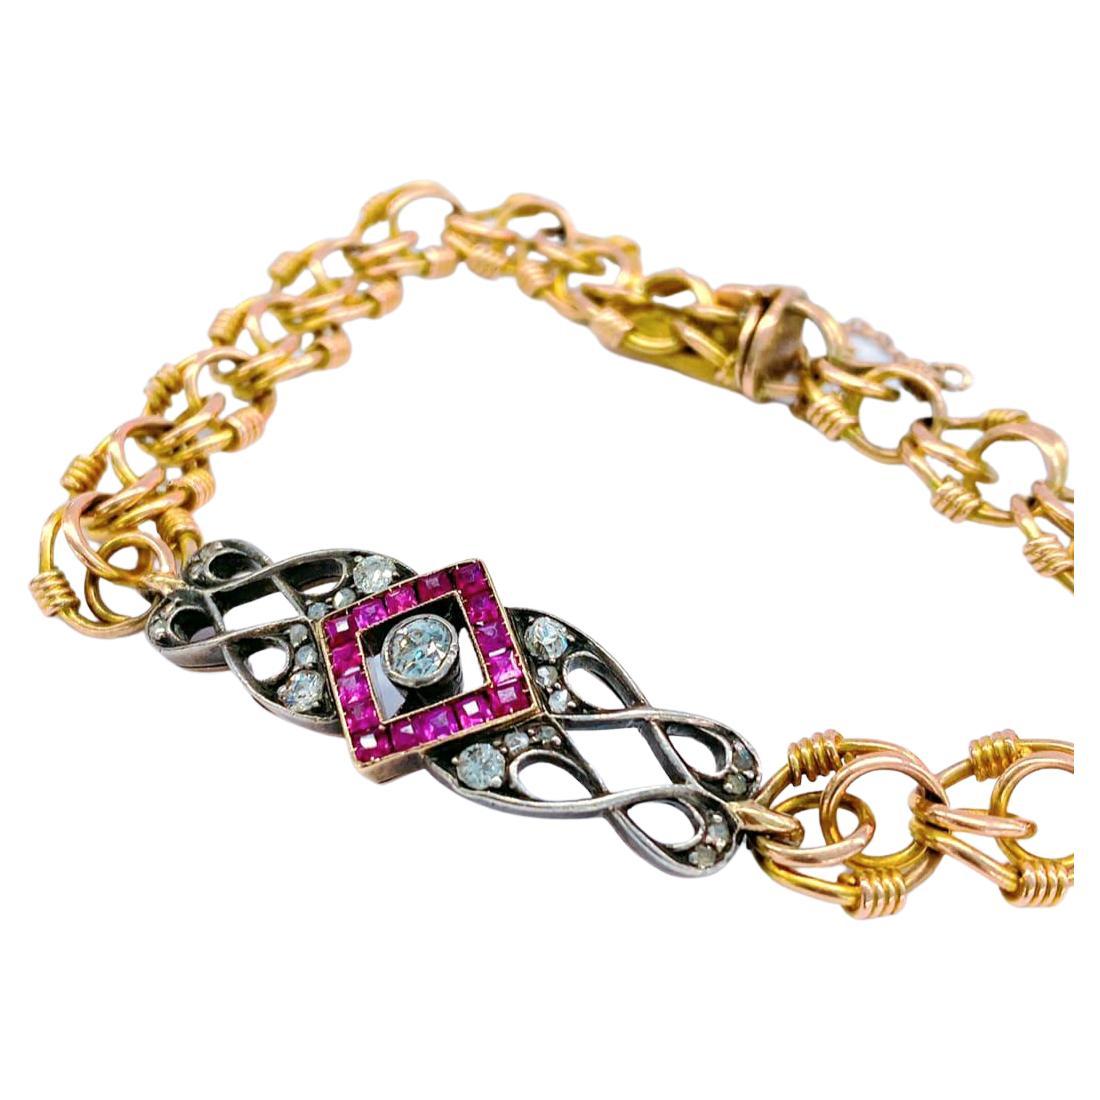 Antique russian link braclet in open work style centered with baguet cut rubies and old mine cut diamonds with estimate weight og 0.70 carats braclet lengh 19cm and total gold weight of 19 grams was made in oddesa during the imperial russian era